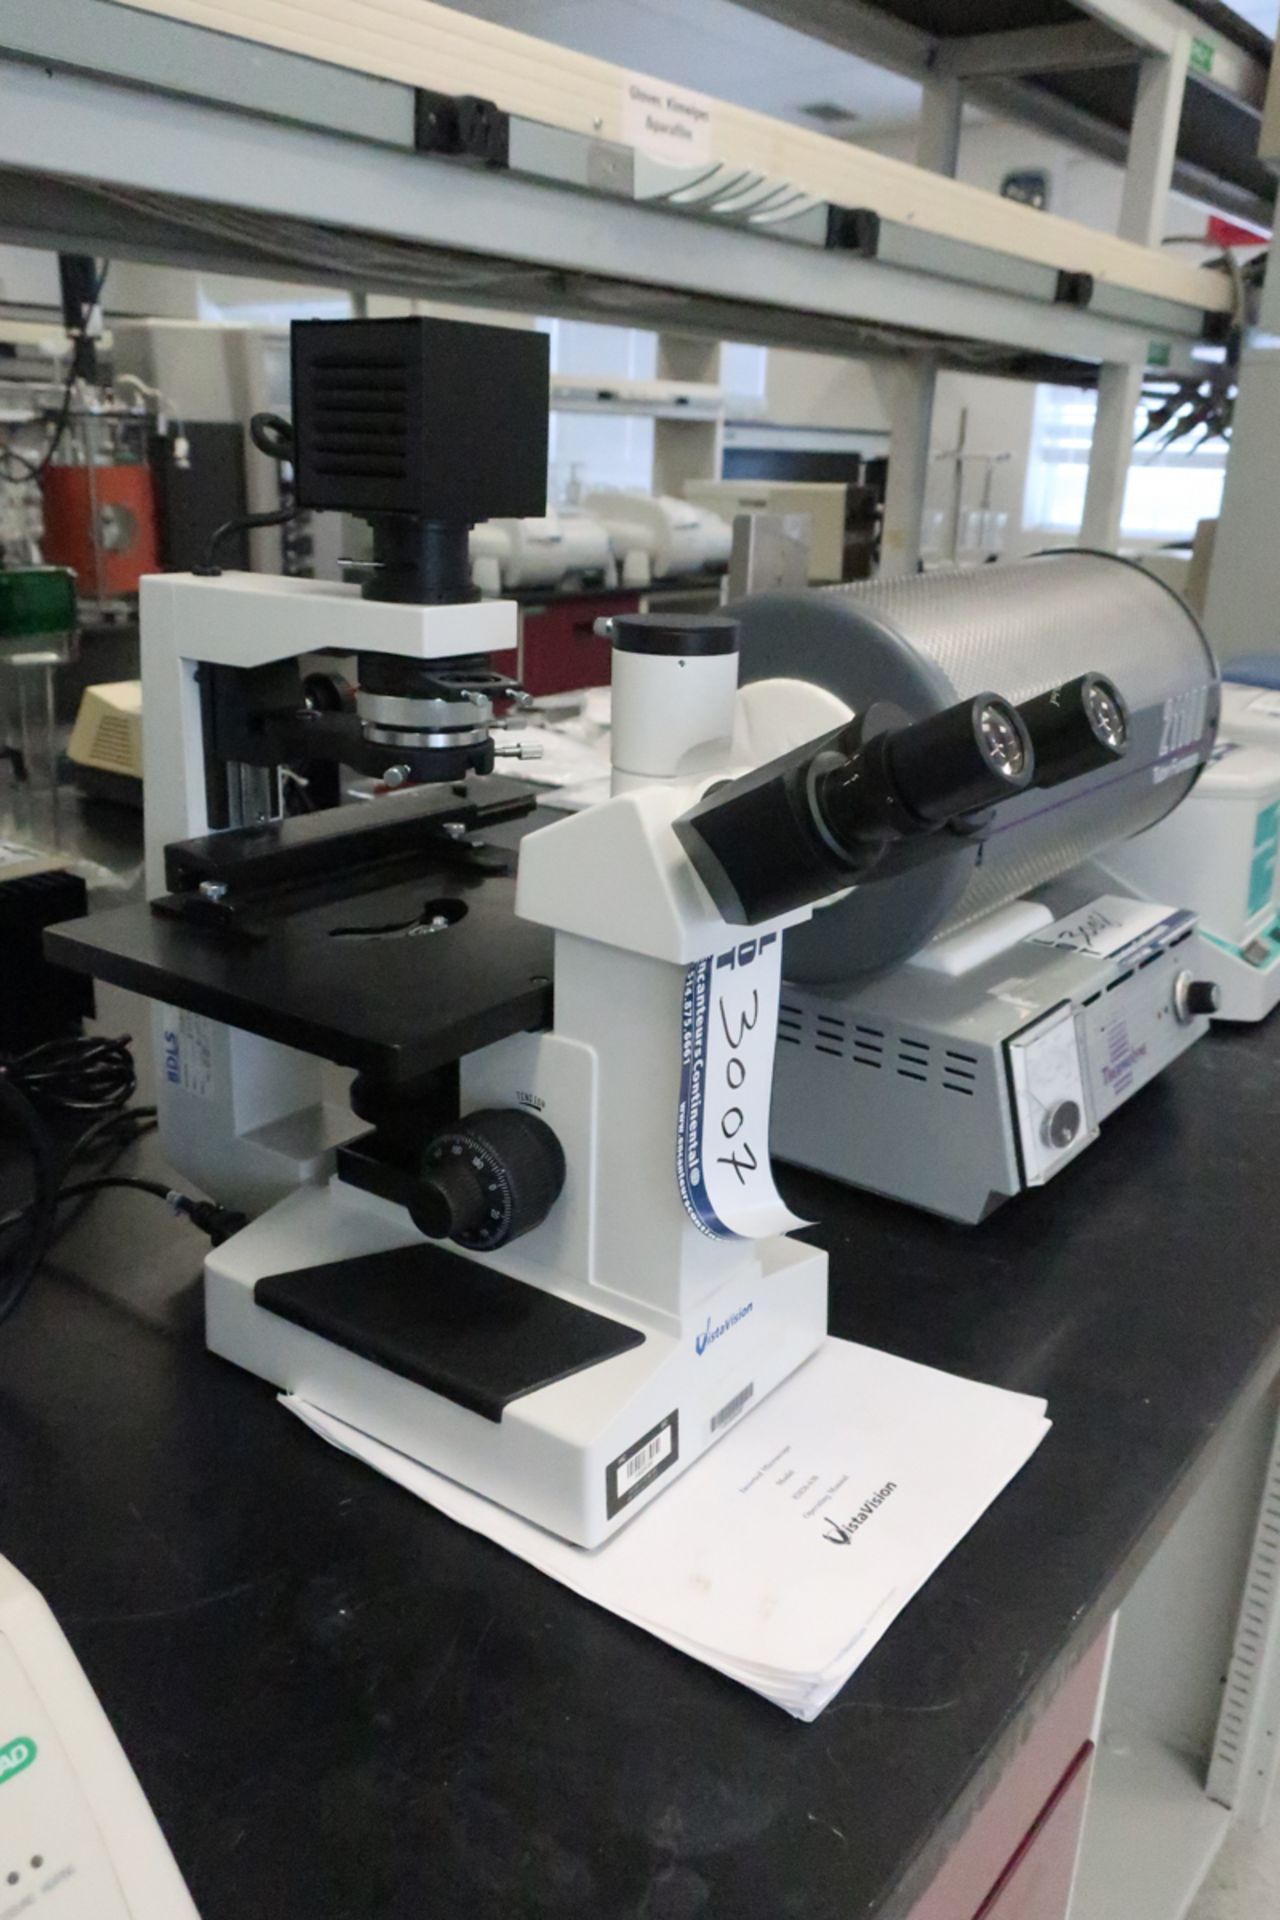 VWR VISTAVISION MICROSCOPE #82062-630 ** NOT PART OF THE BULK BID,CONDITIONAL TO CREDITOR'S APPROVAL - Image 2 of 4